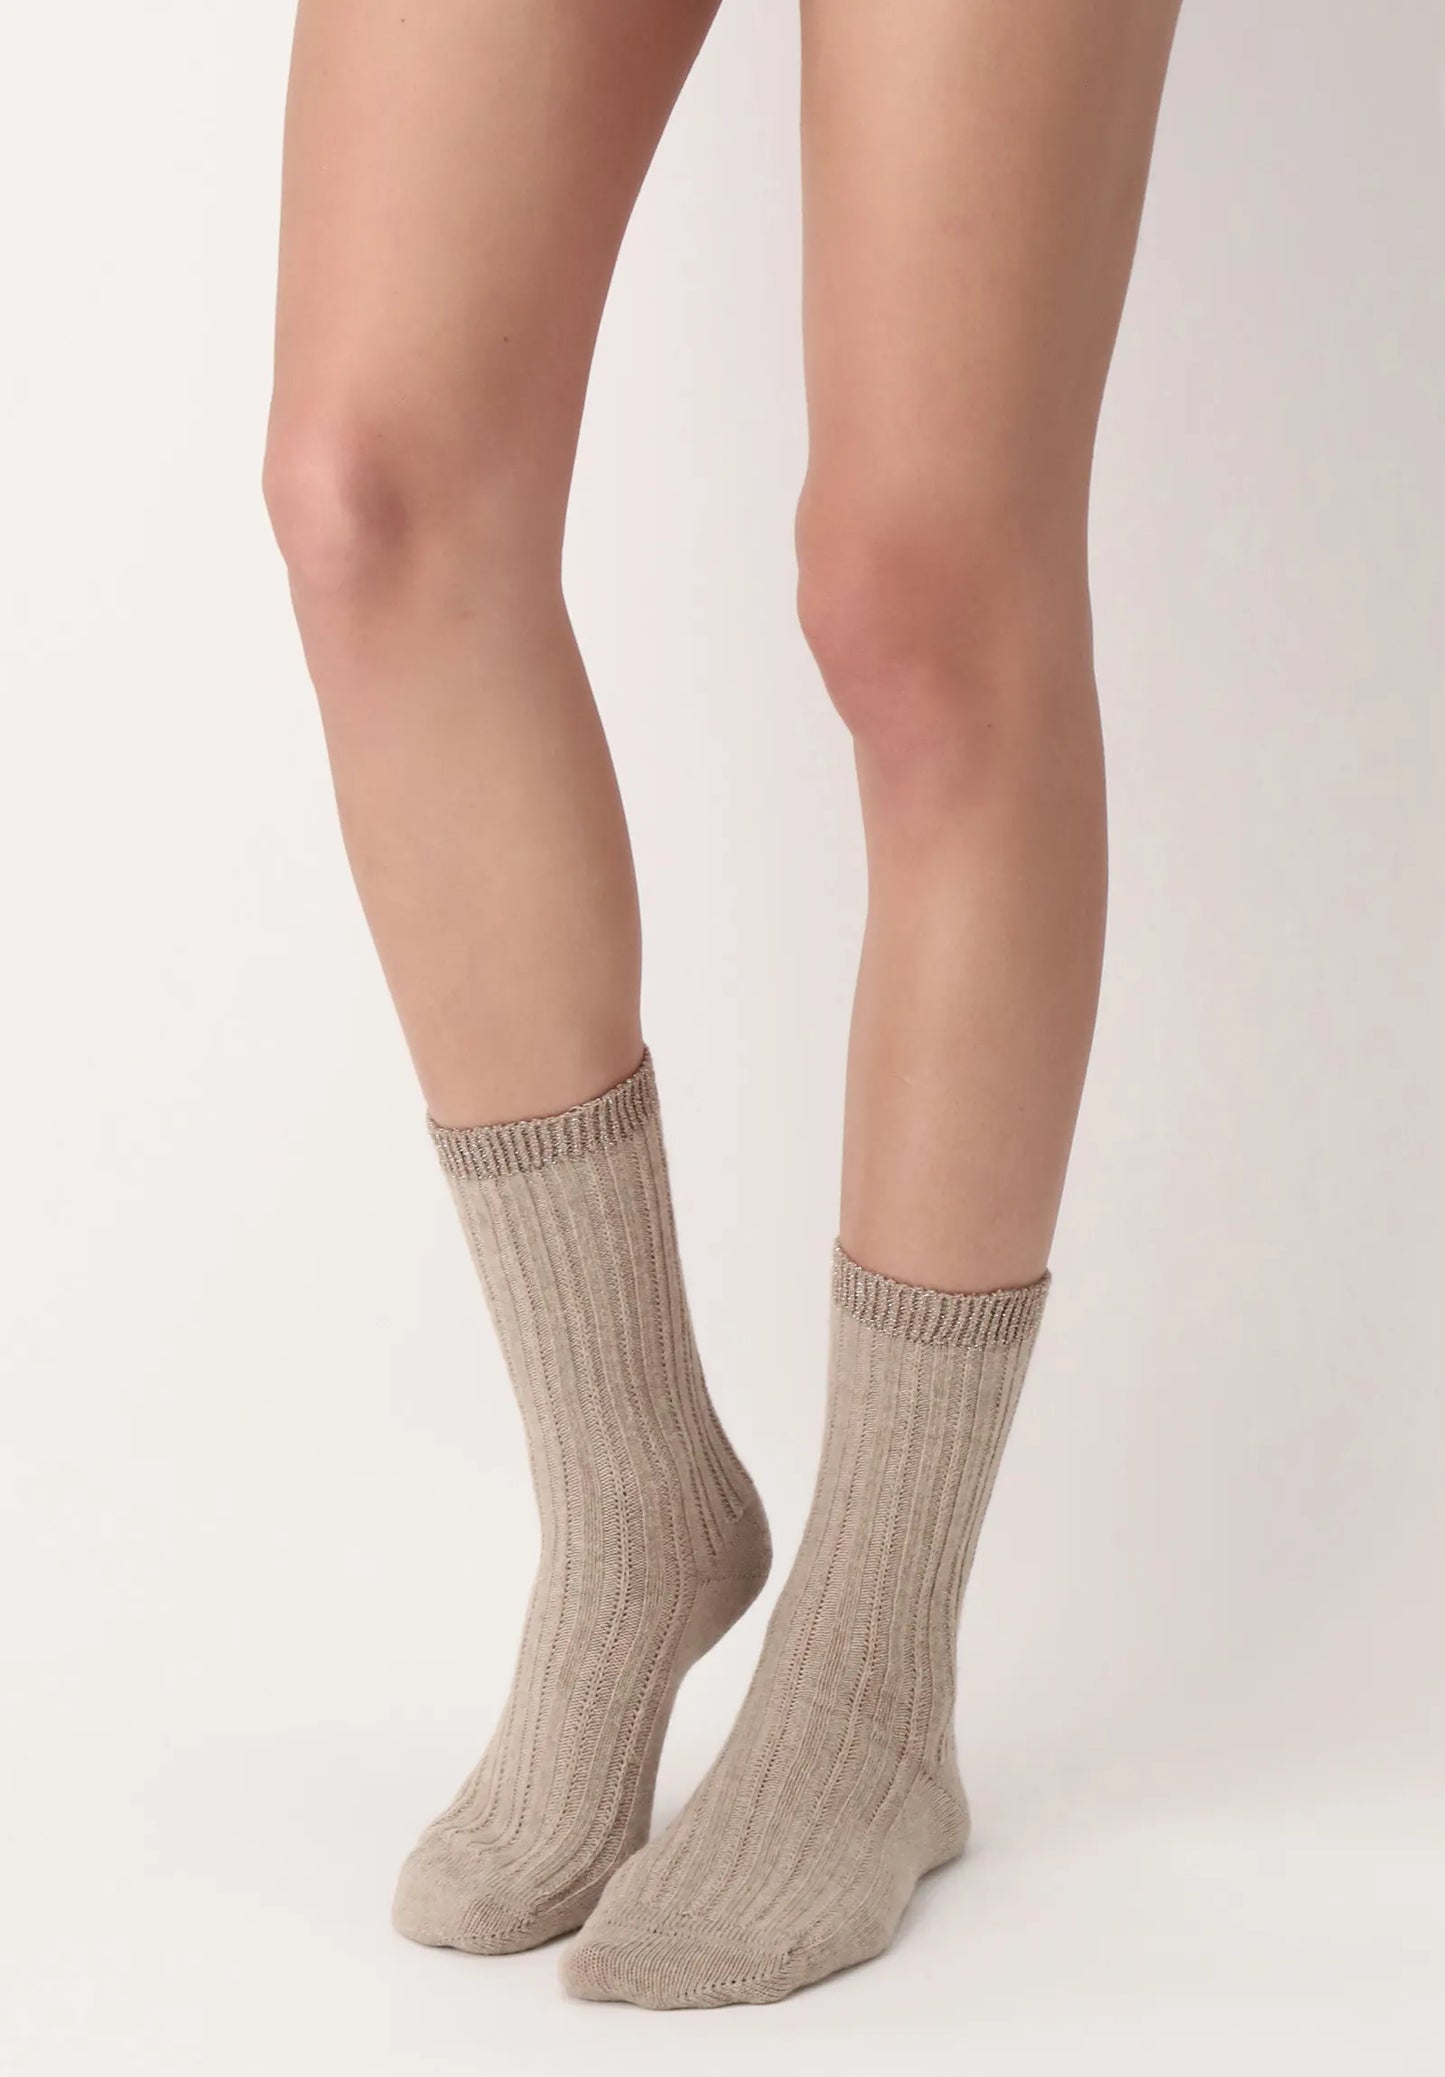 OroblÌ_ Jasmine Sock - Ultra soft and warm beige thermal cable ribbed knitted ankle socks with a touch of alpaca, sparkly gold lurex cuff.OroblÌ_ Jasmine Sock - Ultra soft and warm beige thermal cable ribbed knitted ankle socks with a touch of alpaca, sparkly silver lurex cuff.